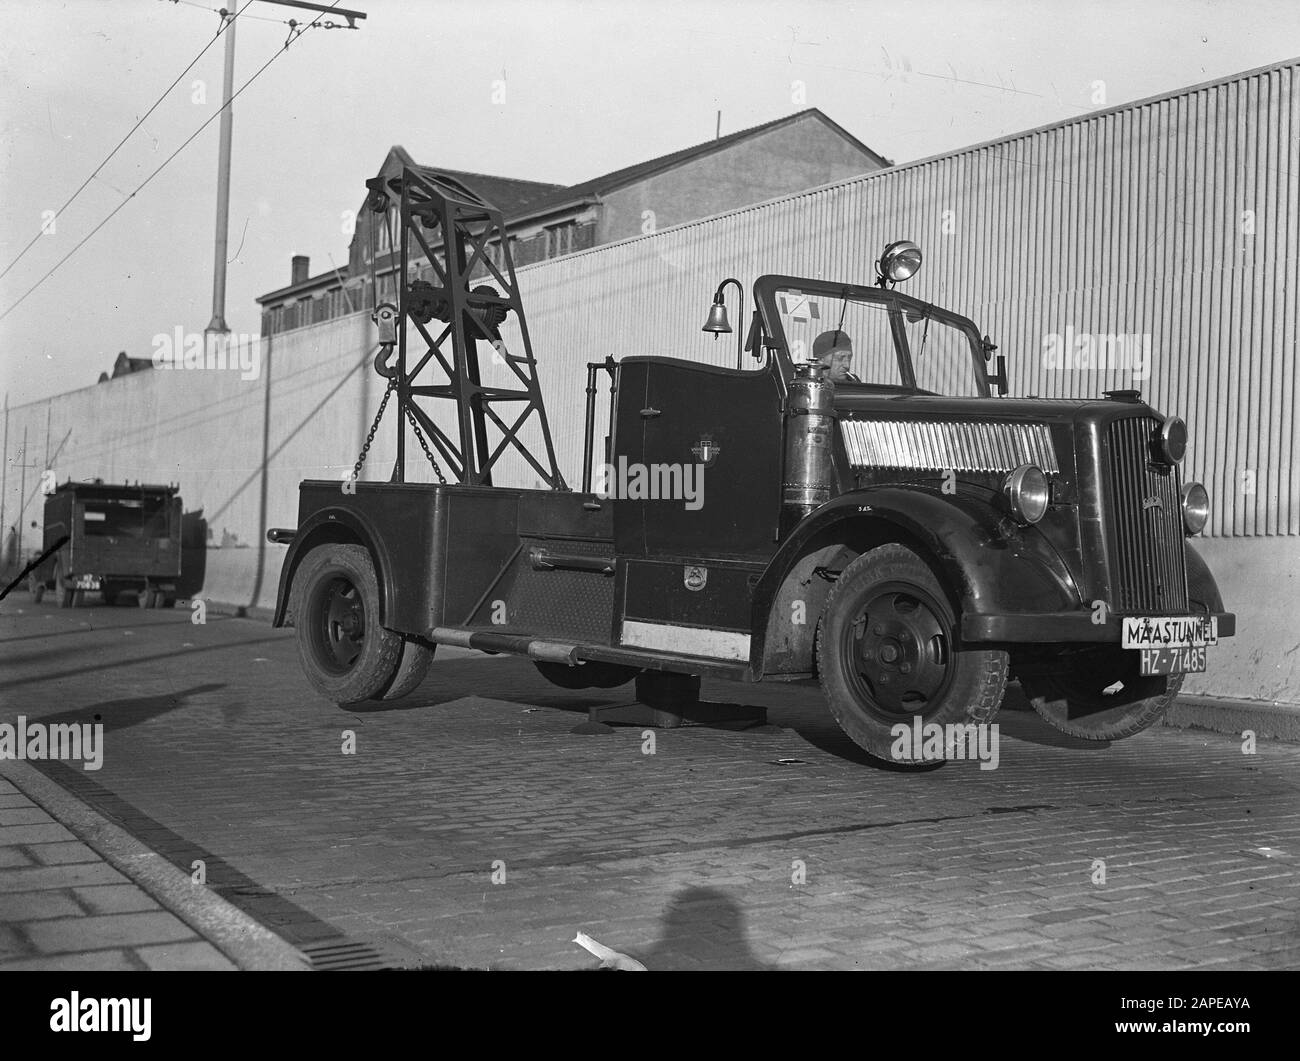 Quel véhicule pour cette grue? The-special-opel-blitz-crane-truck-of-the-maastunnel-this-is-built-by-geesink-from-weesp-and-equipped-with-a-centrally-placed-lifting-column-that-lifts-the-vehicle-completely-and-allows-the-vehicle-to-rotate-360-degrees-date-18-january-1946-location-rotterdam-zuid-holland-keywords-traffic-trucks-setting-name-maastunnel-opel-2APEAYA